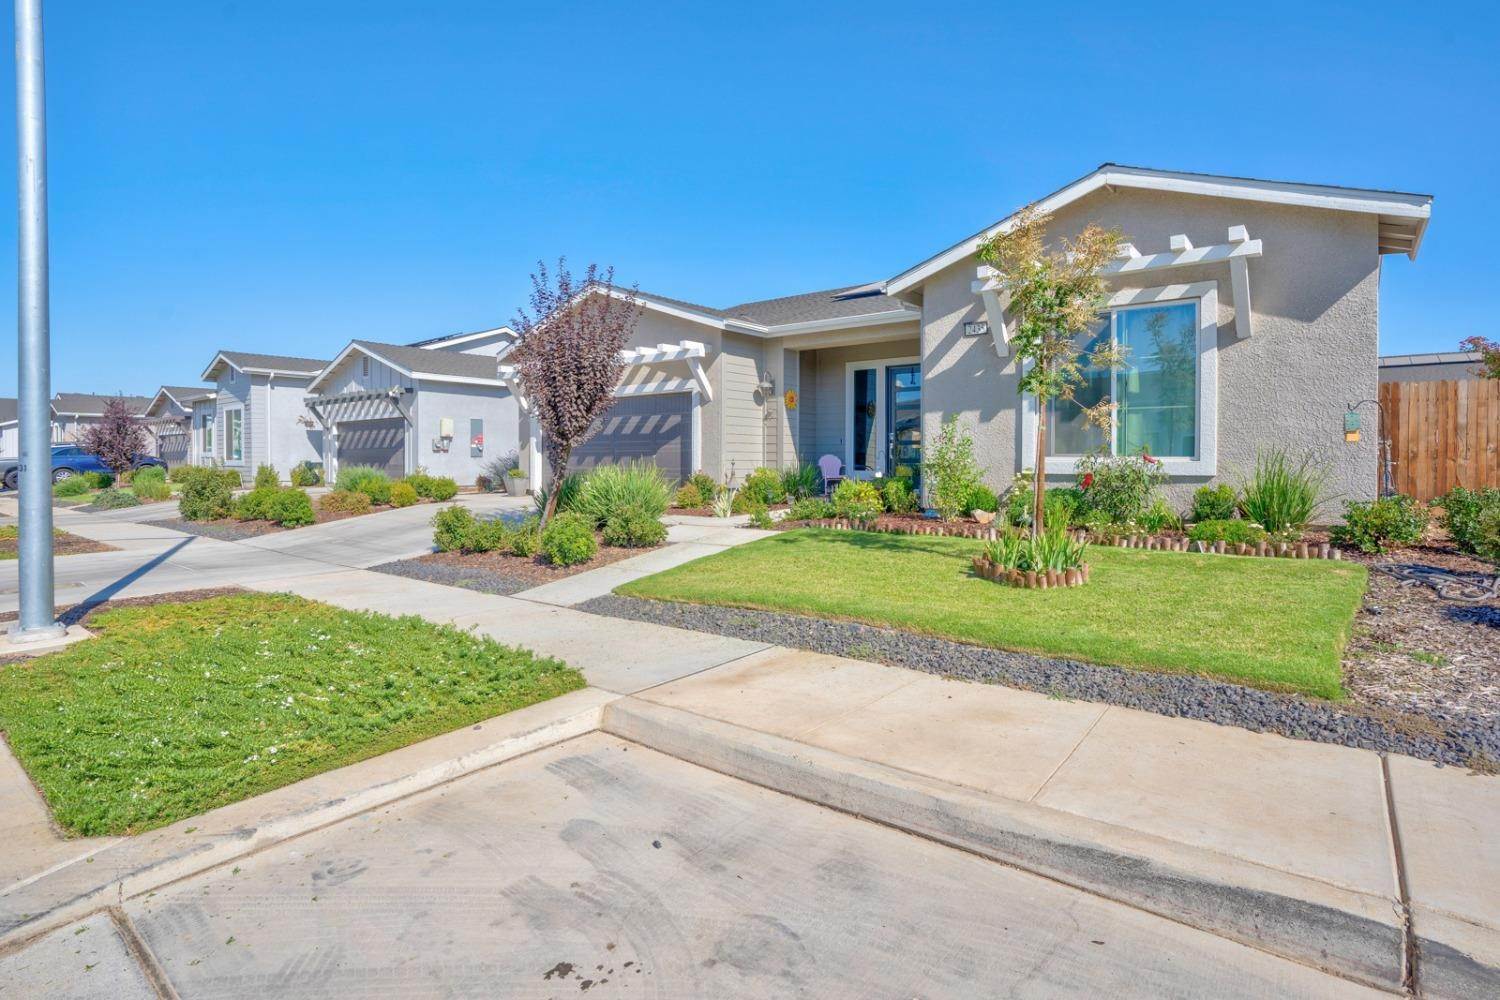 2. Single Family Homes for Active at 2435 Valverde Drive Merced, California 95340 United States